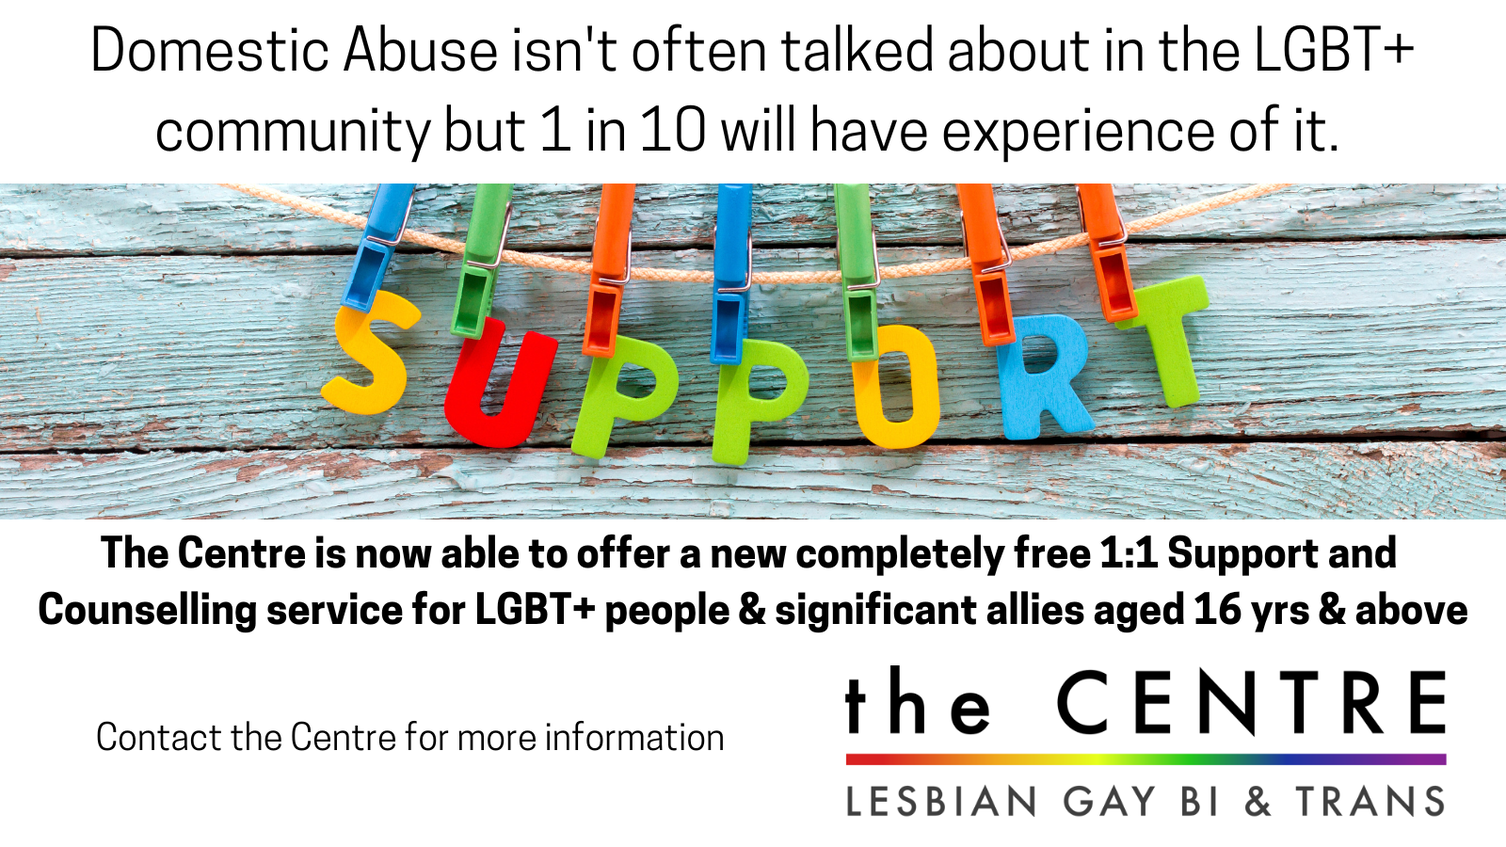 Domestic Abuse Service at Leicester LGBT Centre